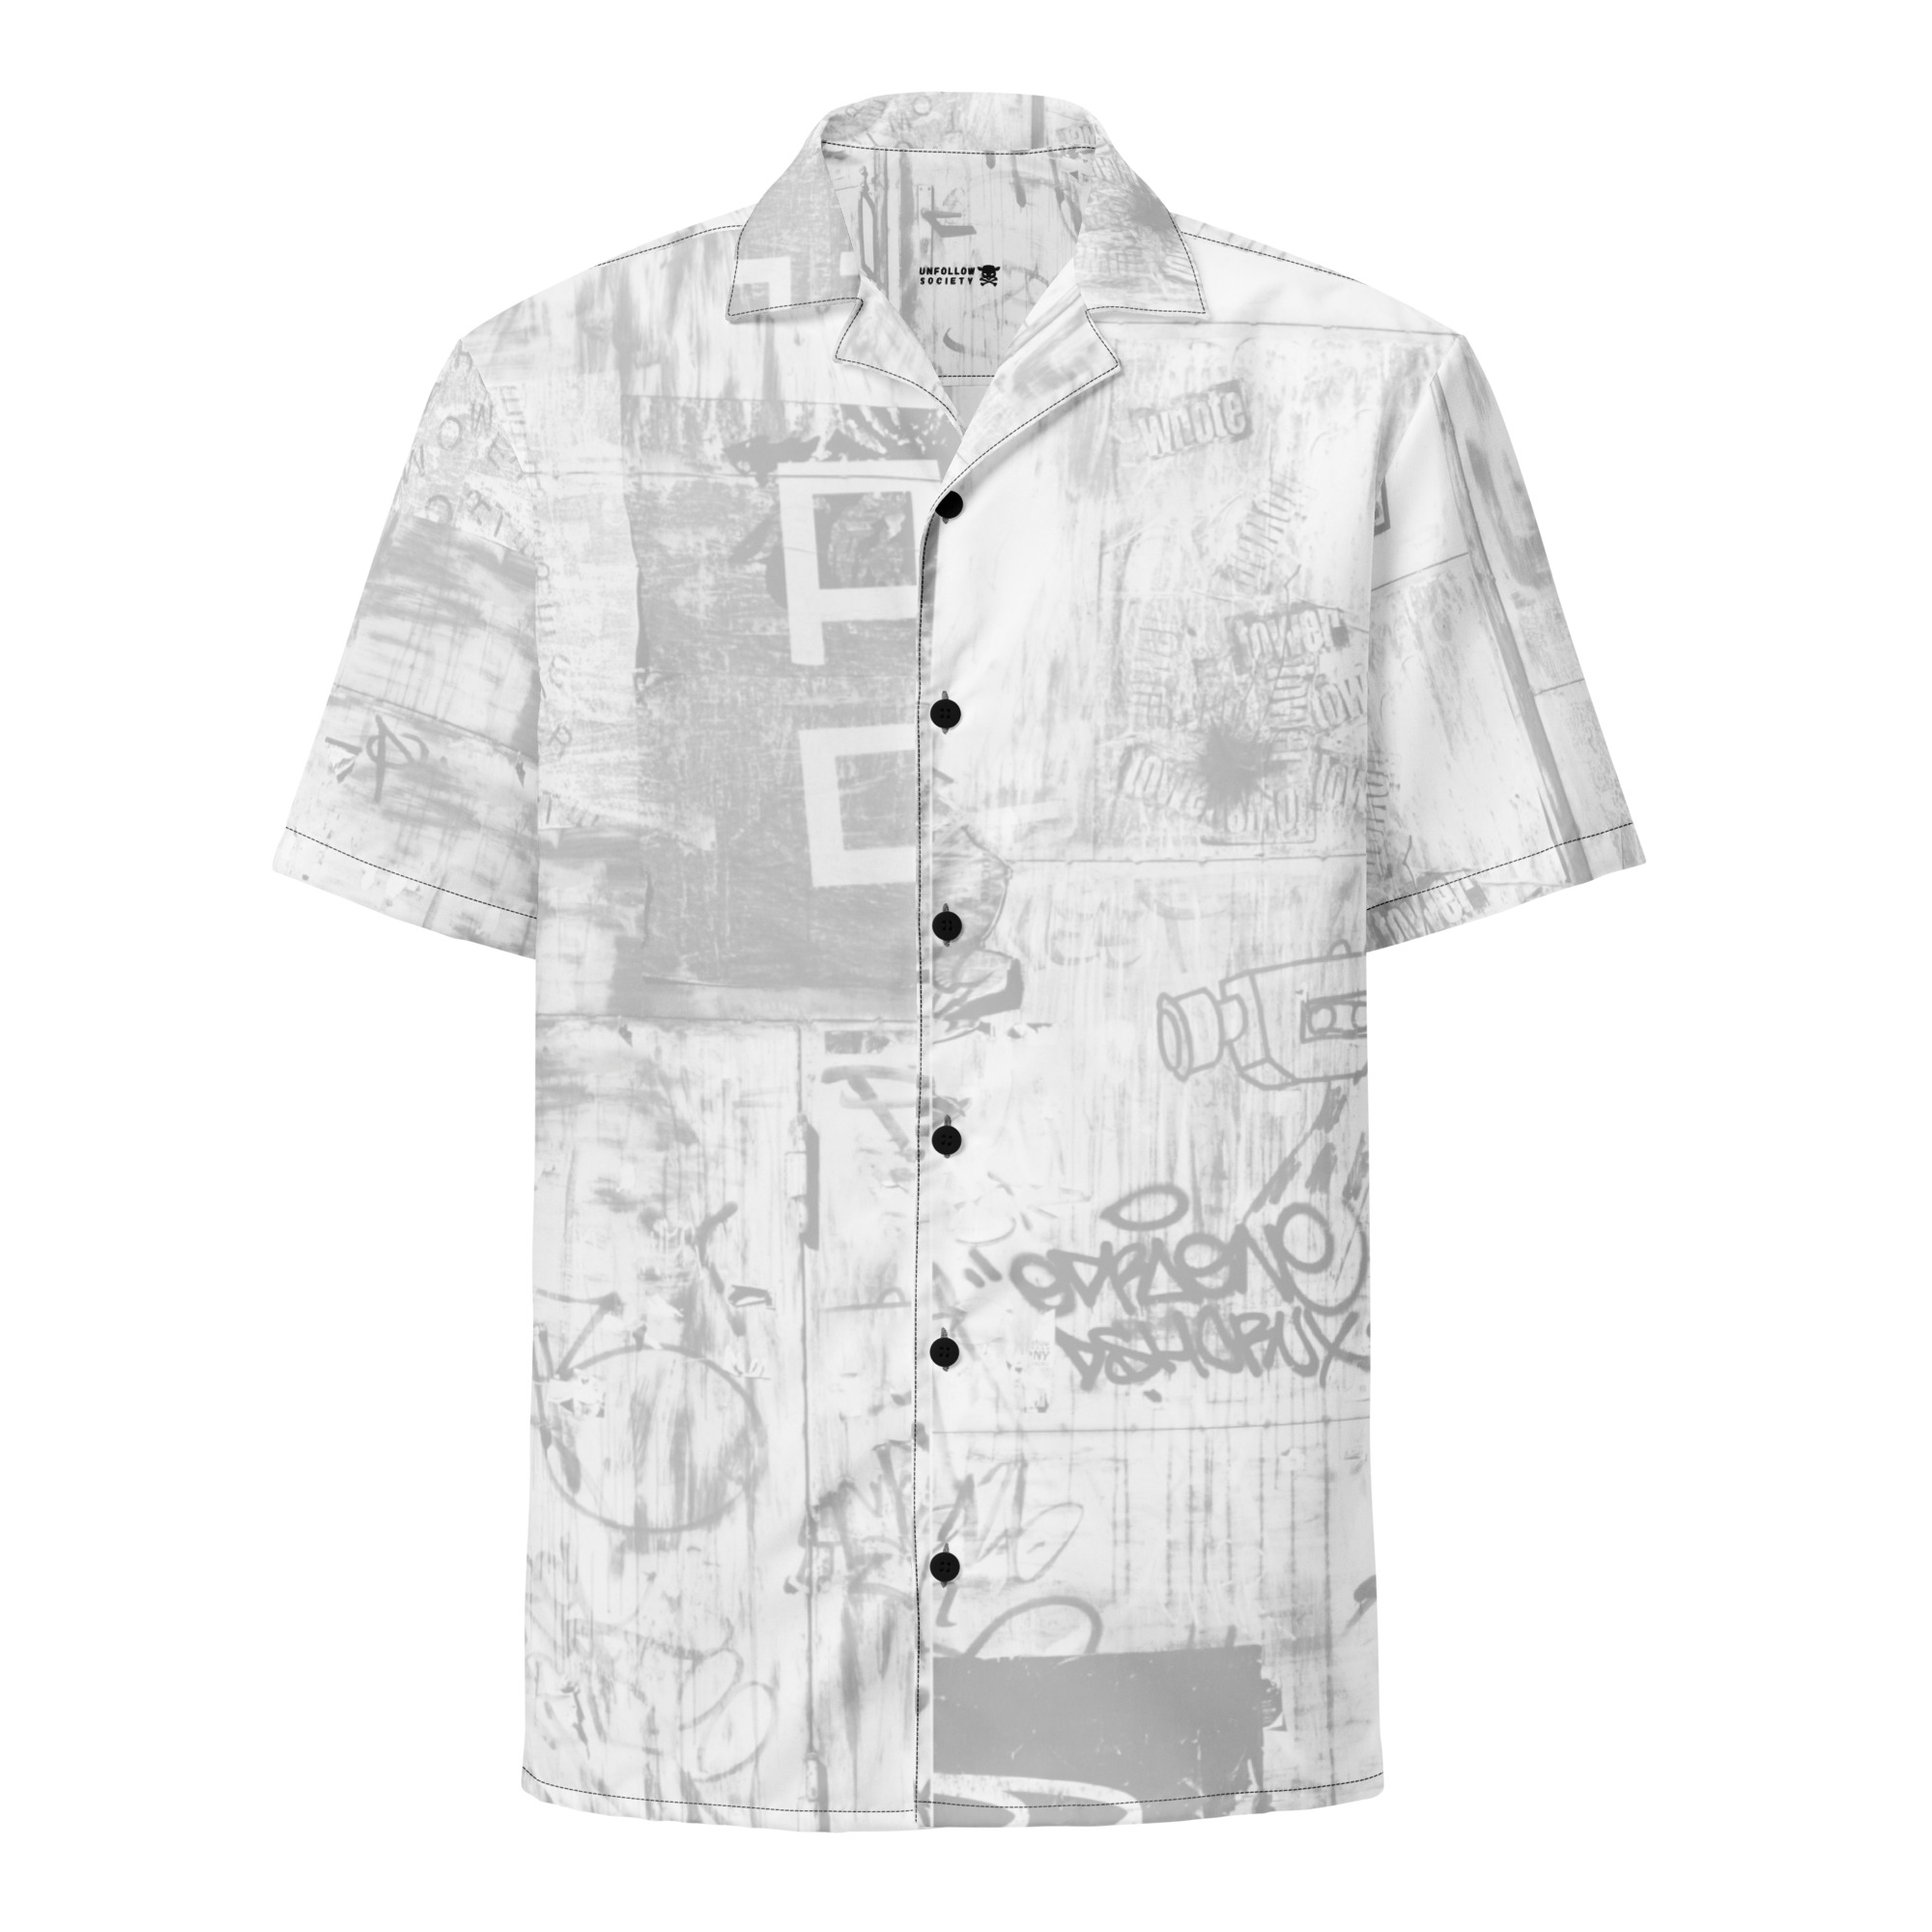 all over print unisex button shirt white front 6683c774cdc01